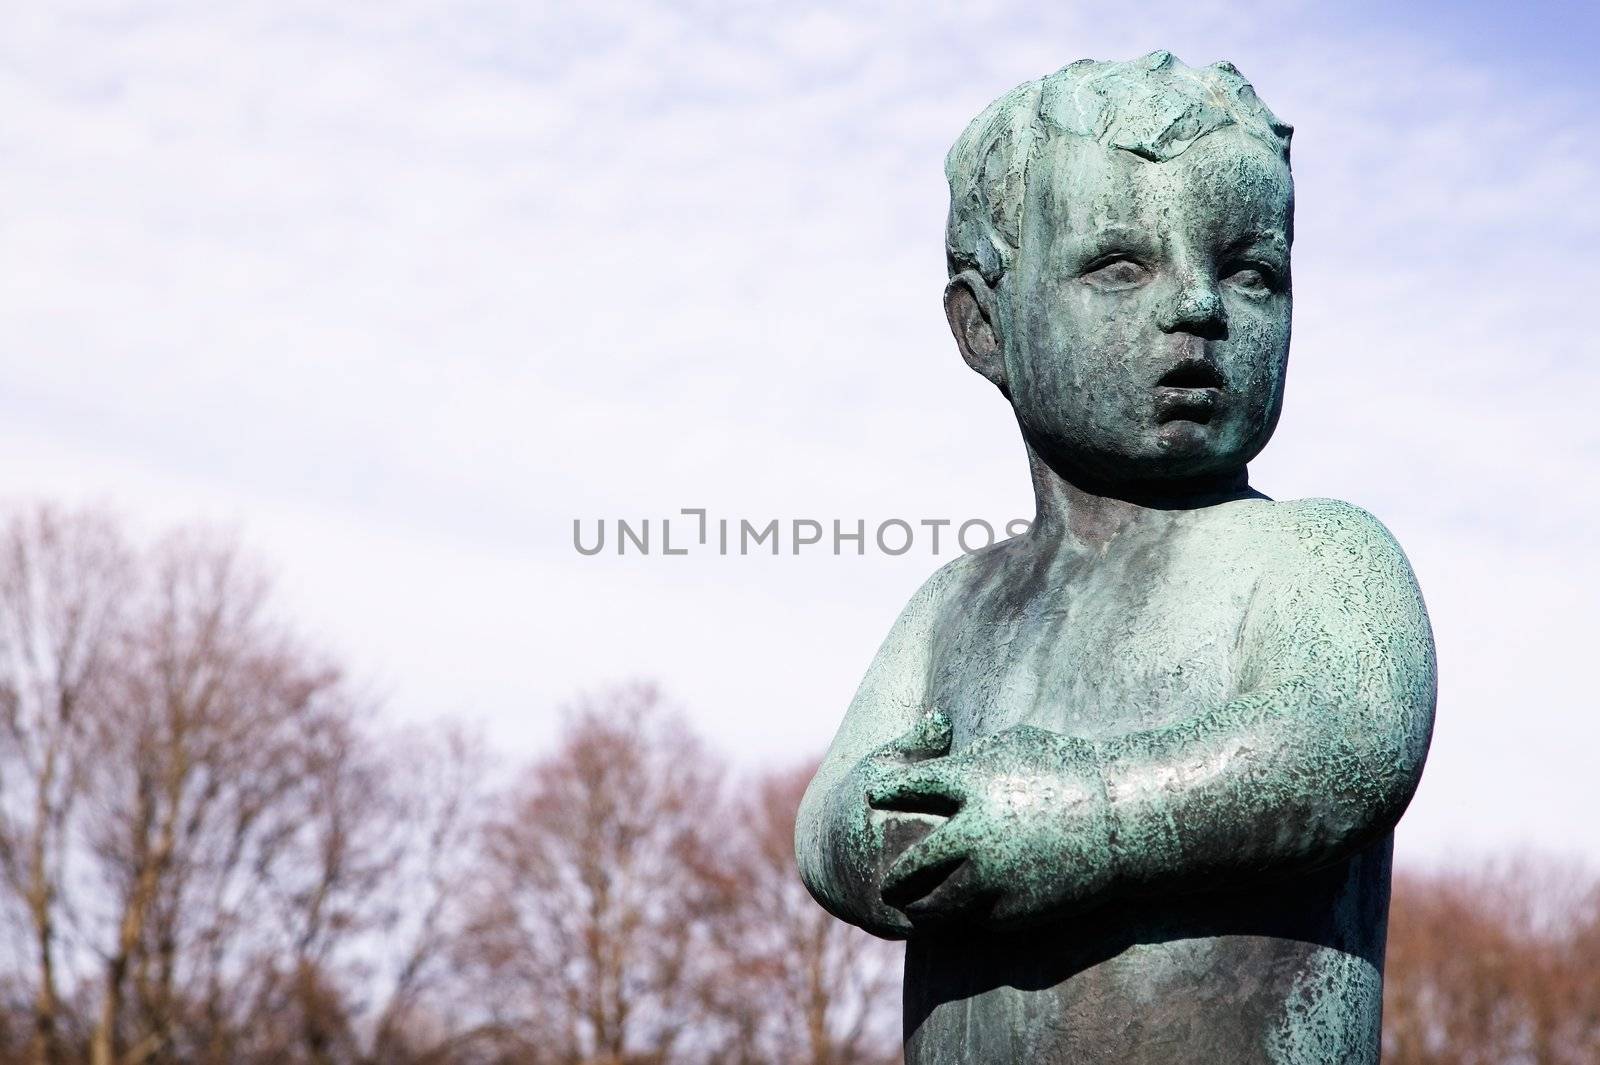 A statue of a worried little boy at the vigeland park, Oslo Norway.